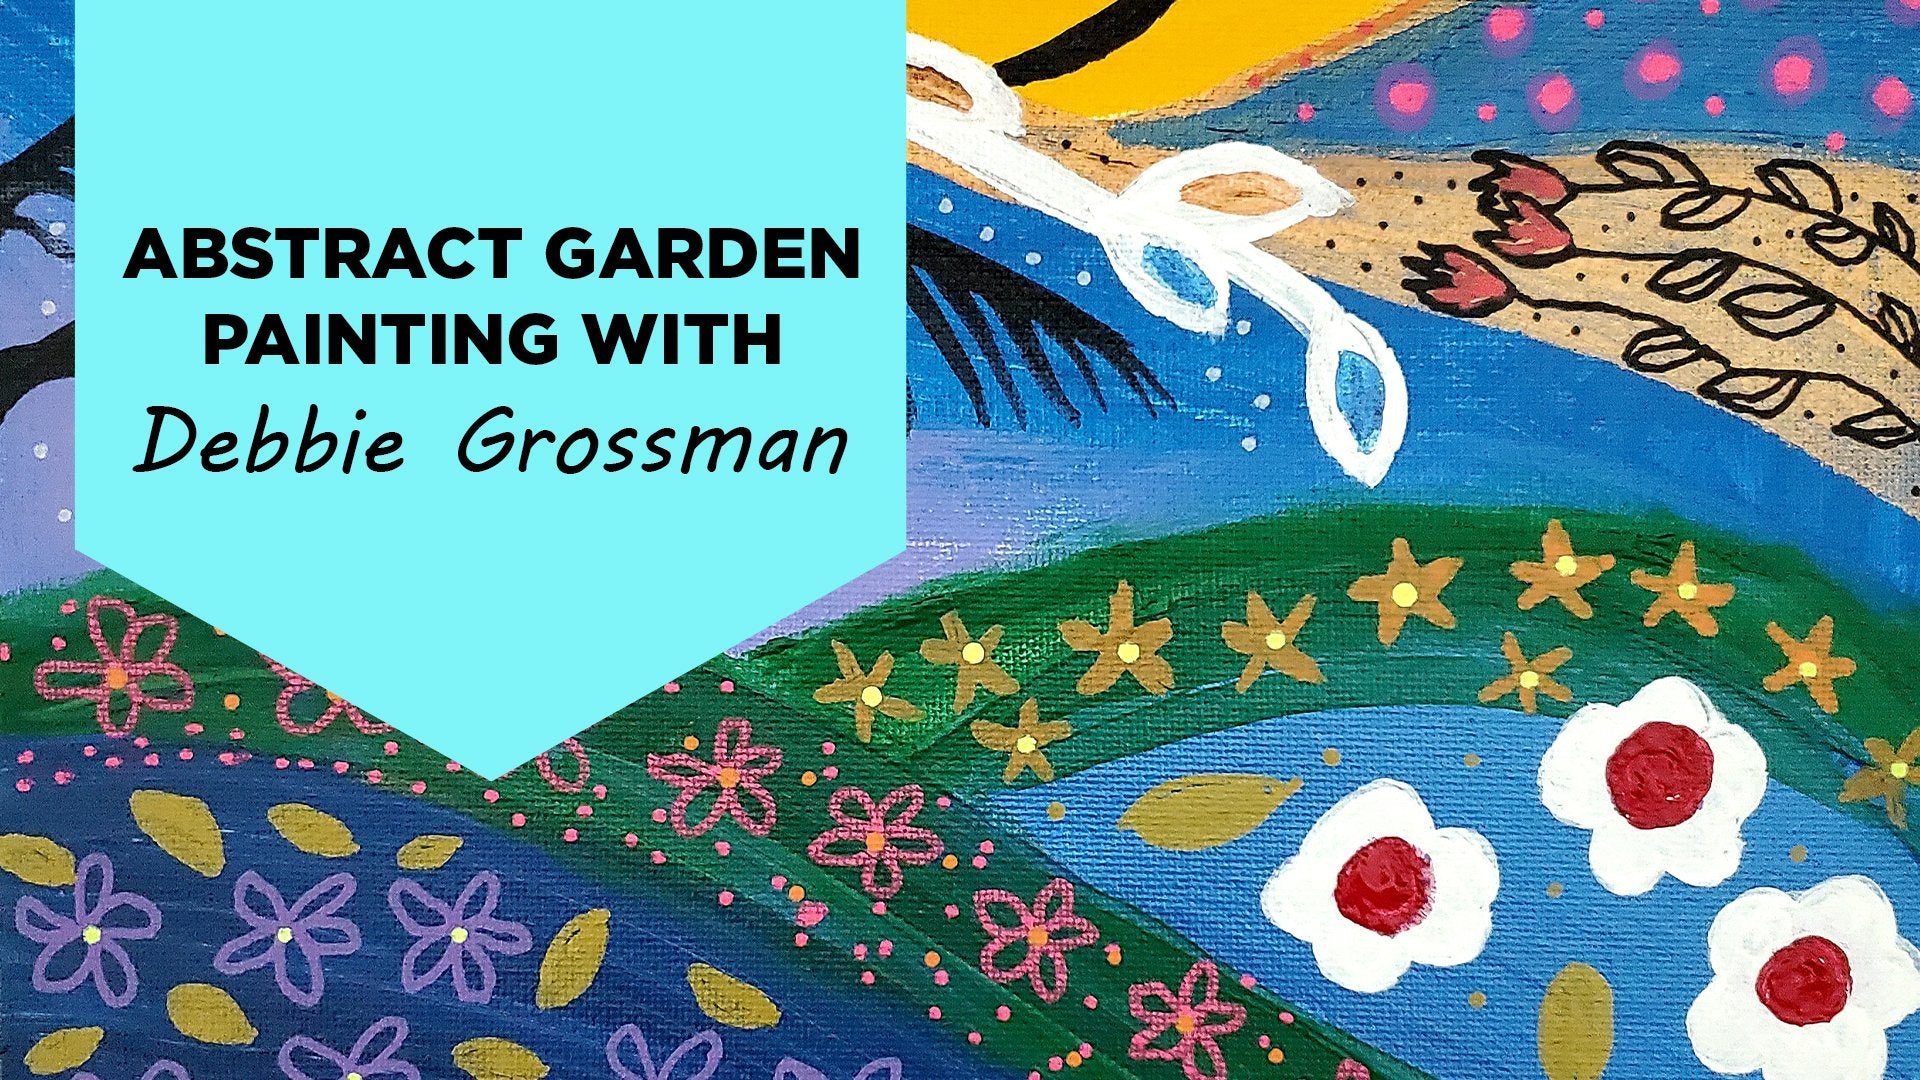 Abstract Garden Painting Using Acrylics with Debbie Grossman